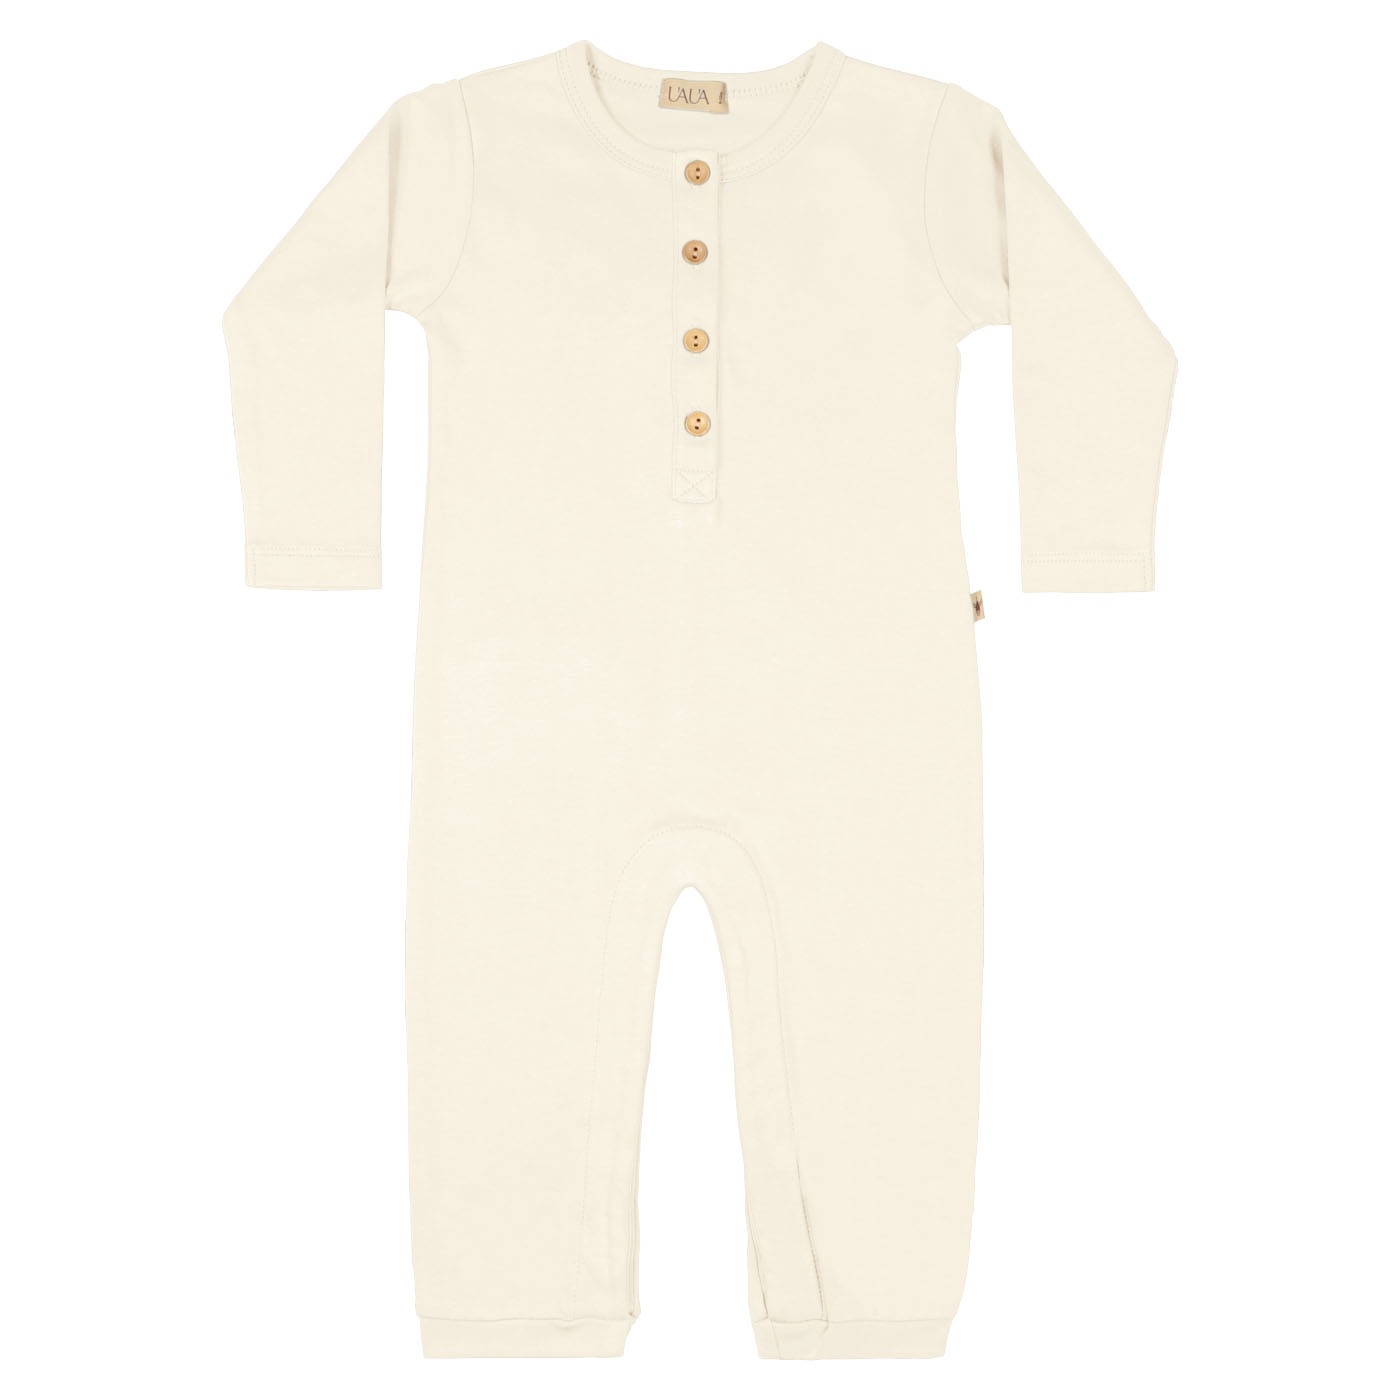 Baby jumpsuit in pima cotton with buttons - Crema - Lima Collection | UAUA Collections